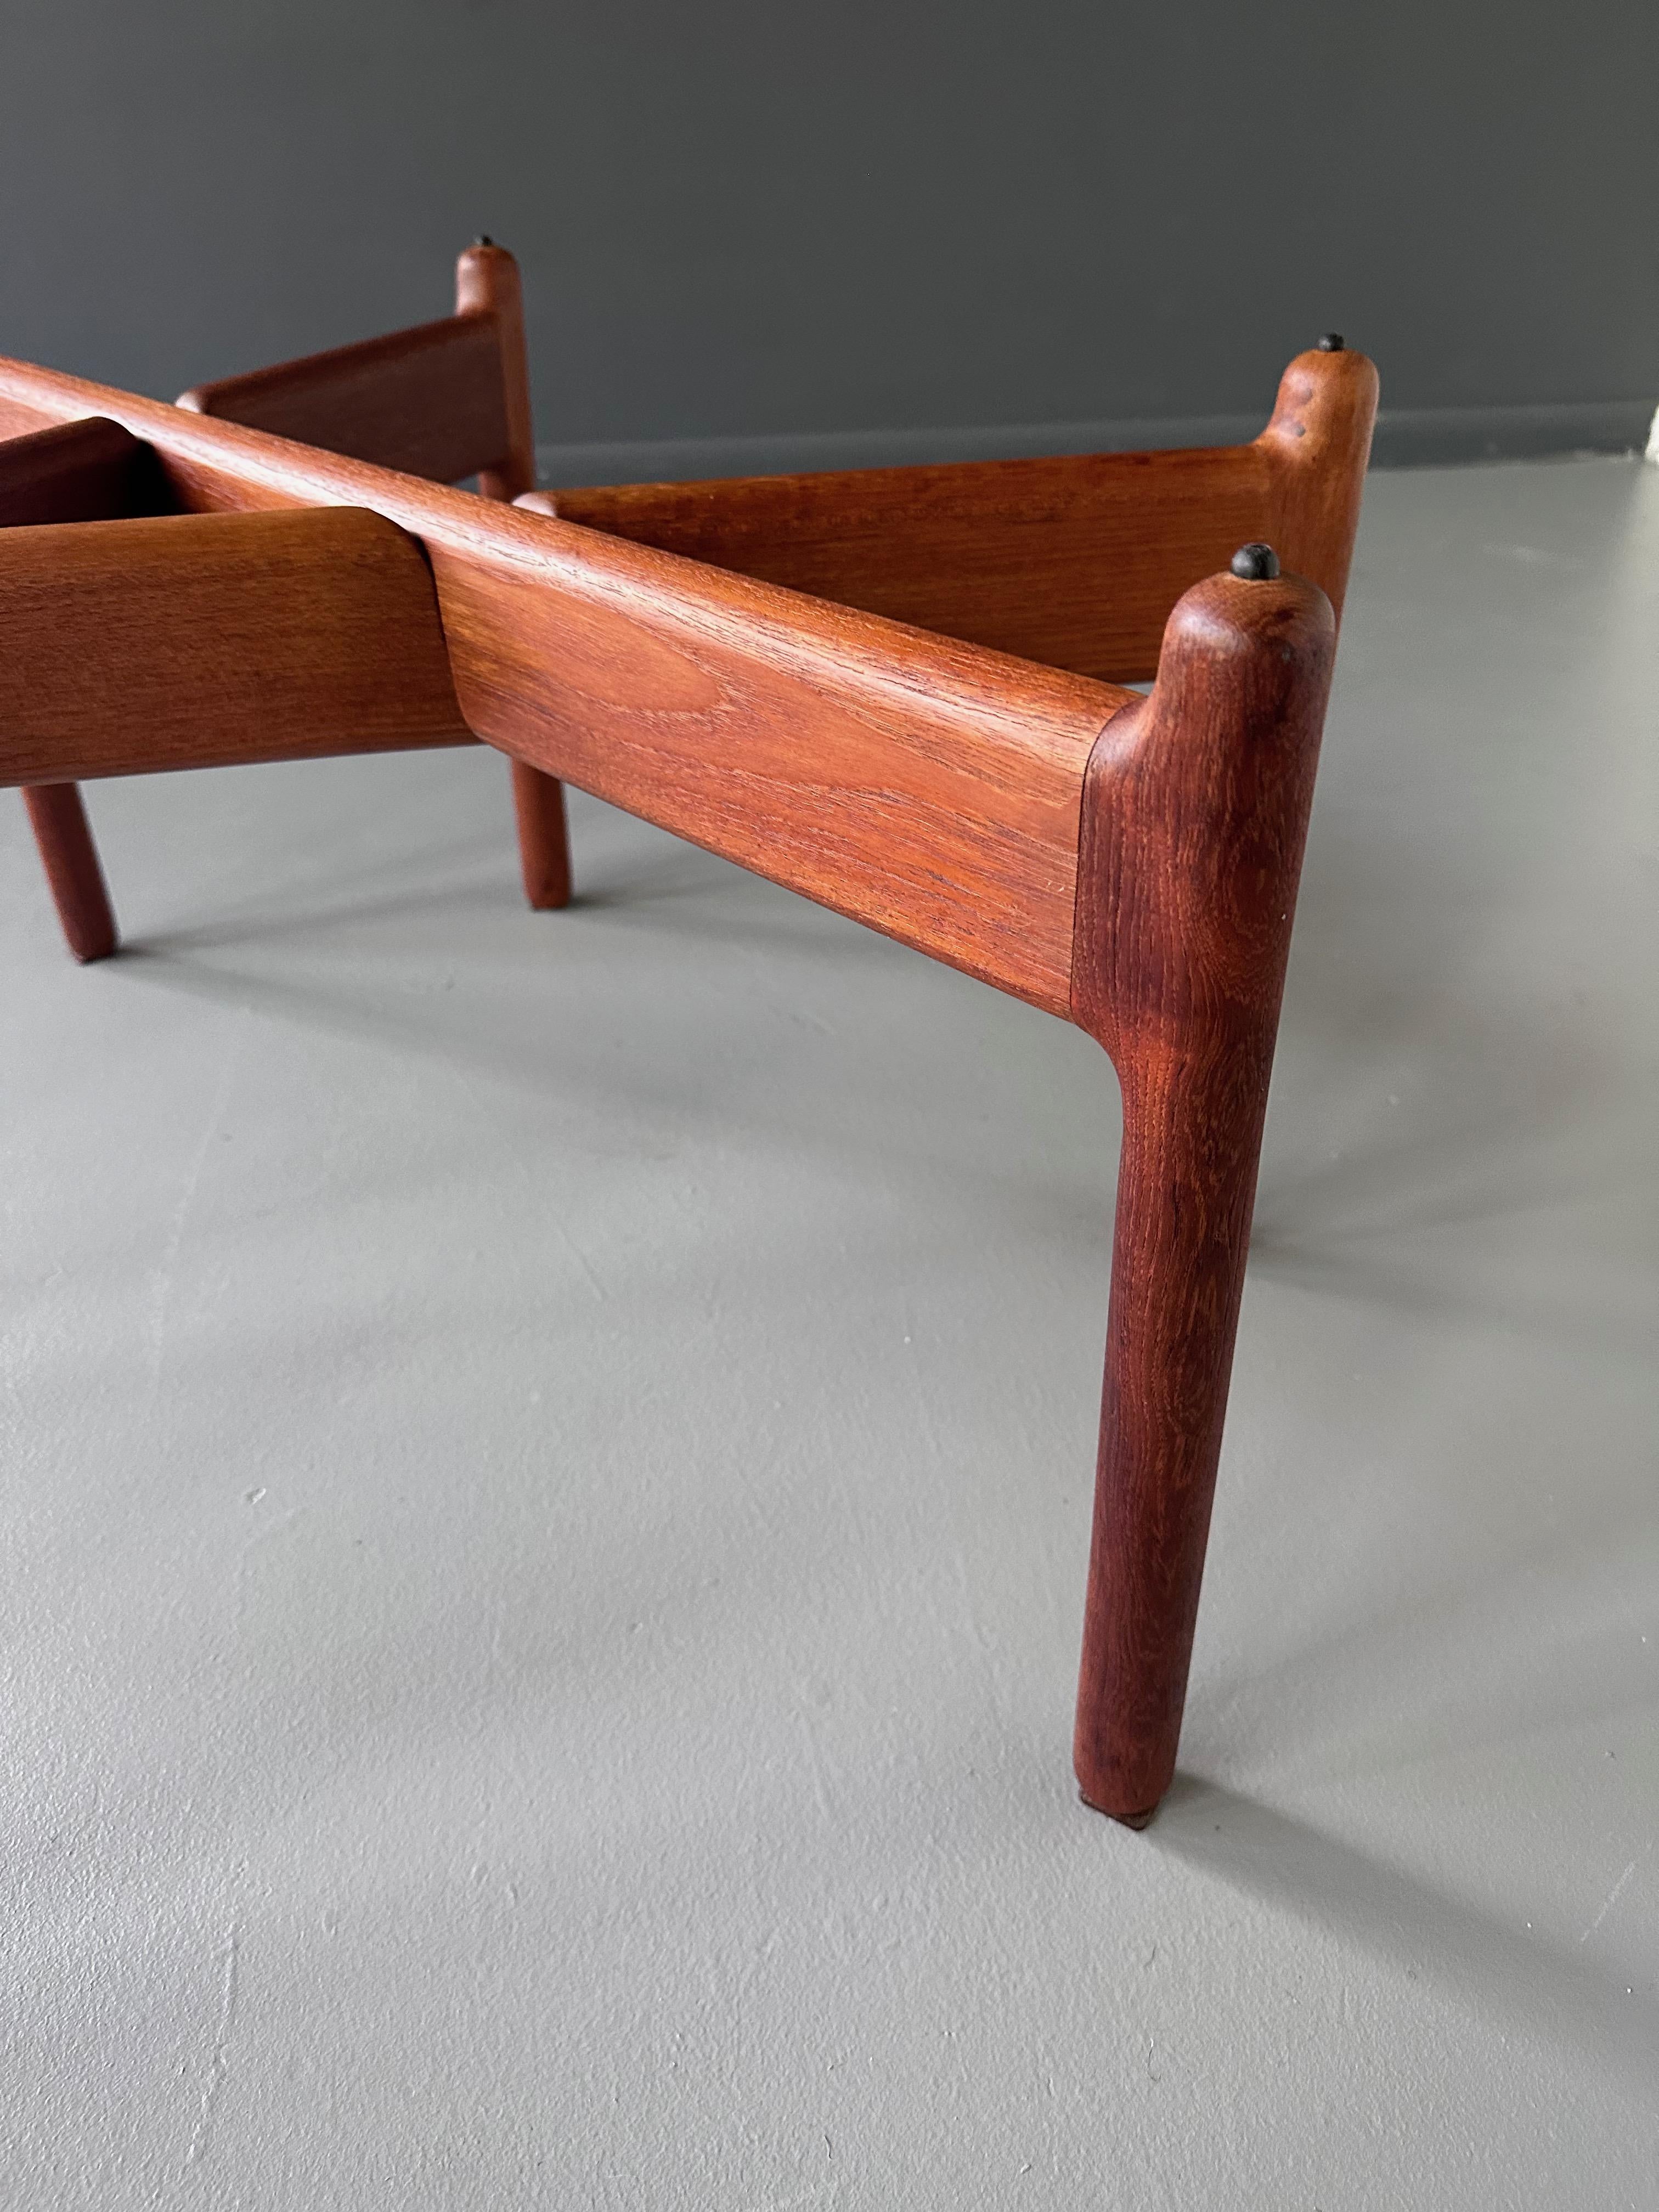 Niels Bach Coffee/Cocktail Table in Teak Denmark 1960 Midcentury For Sale 2